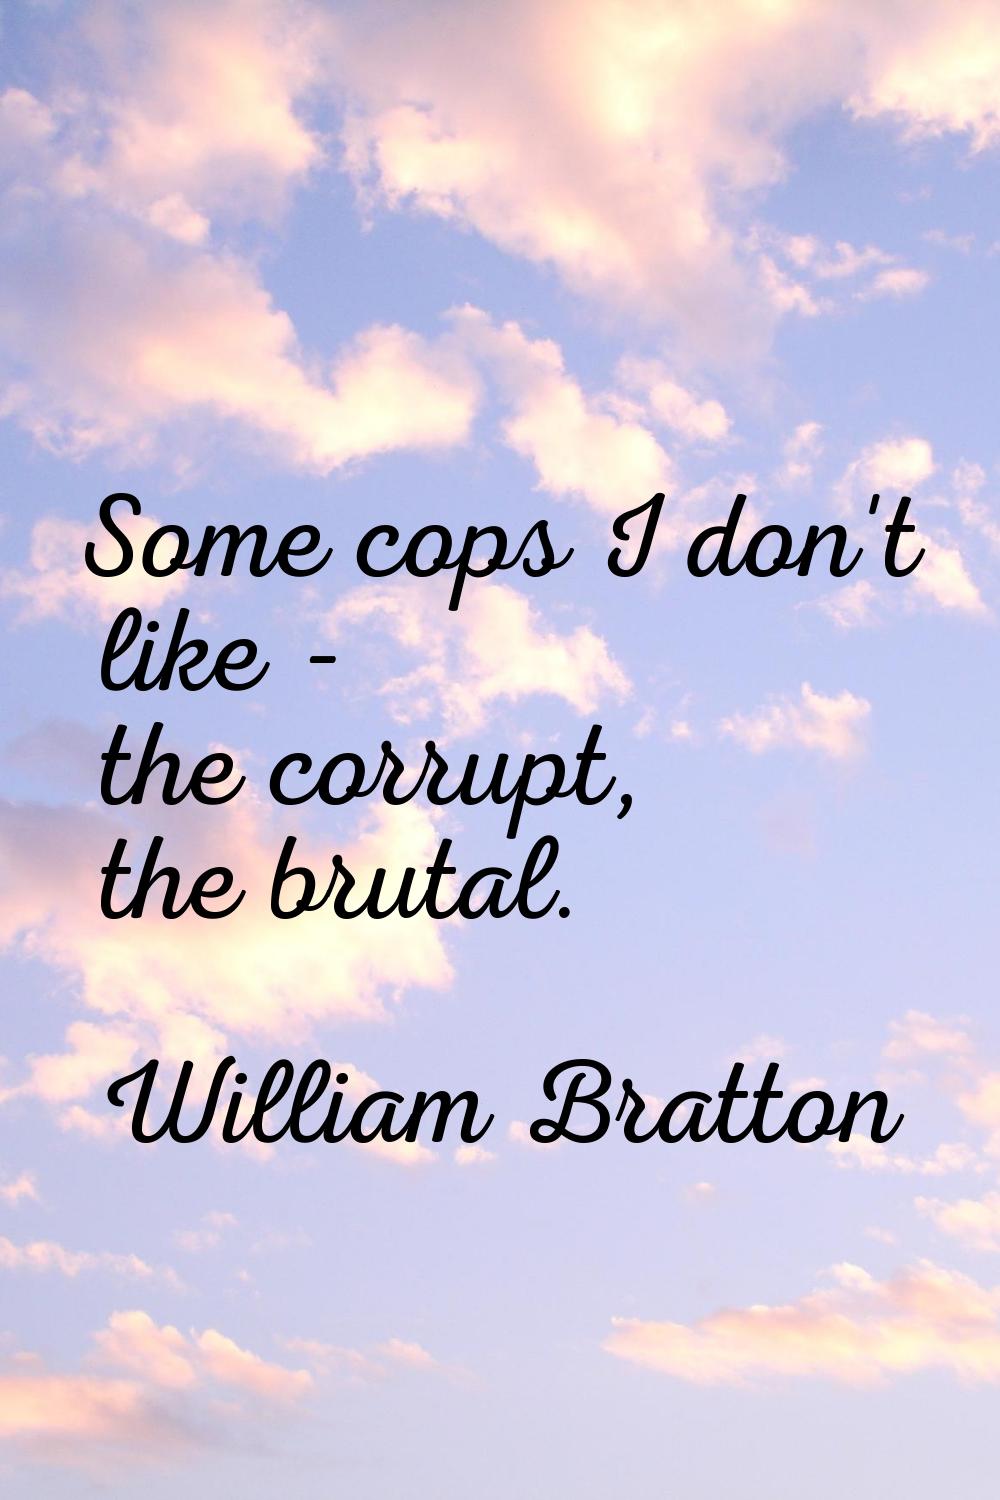 Some cops I don't like - the corrupt, the brutal.